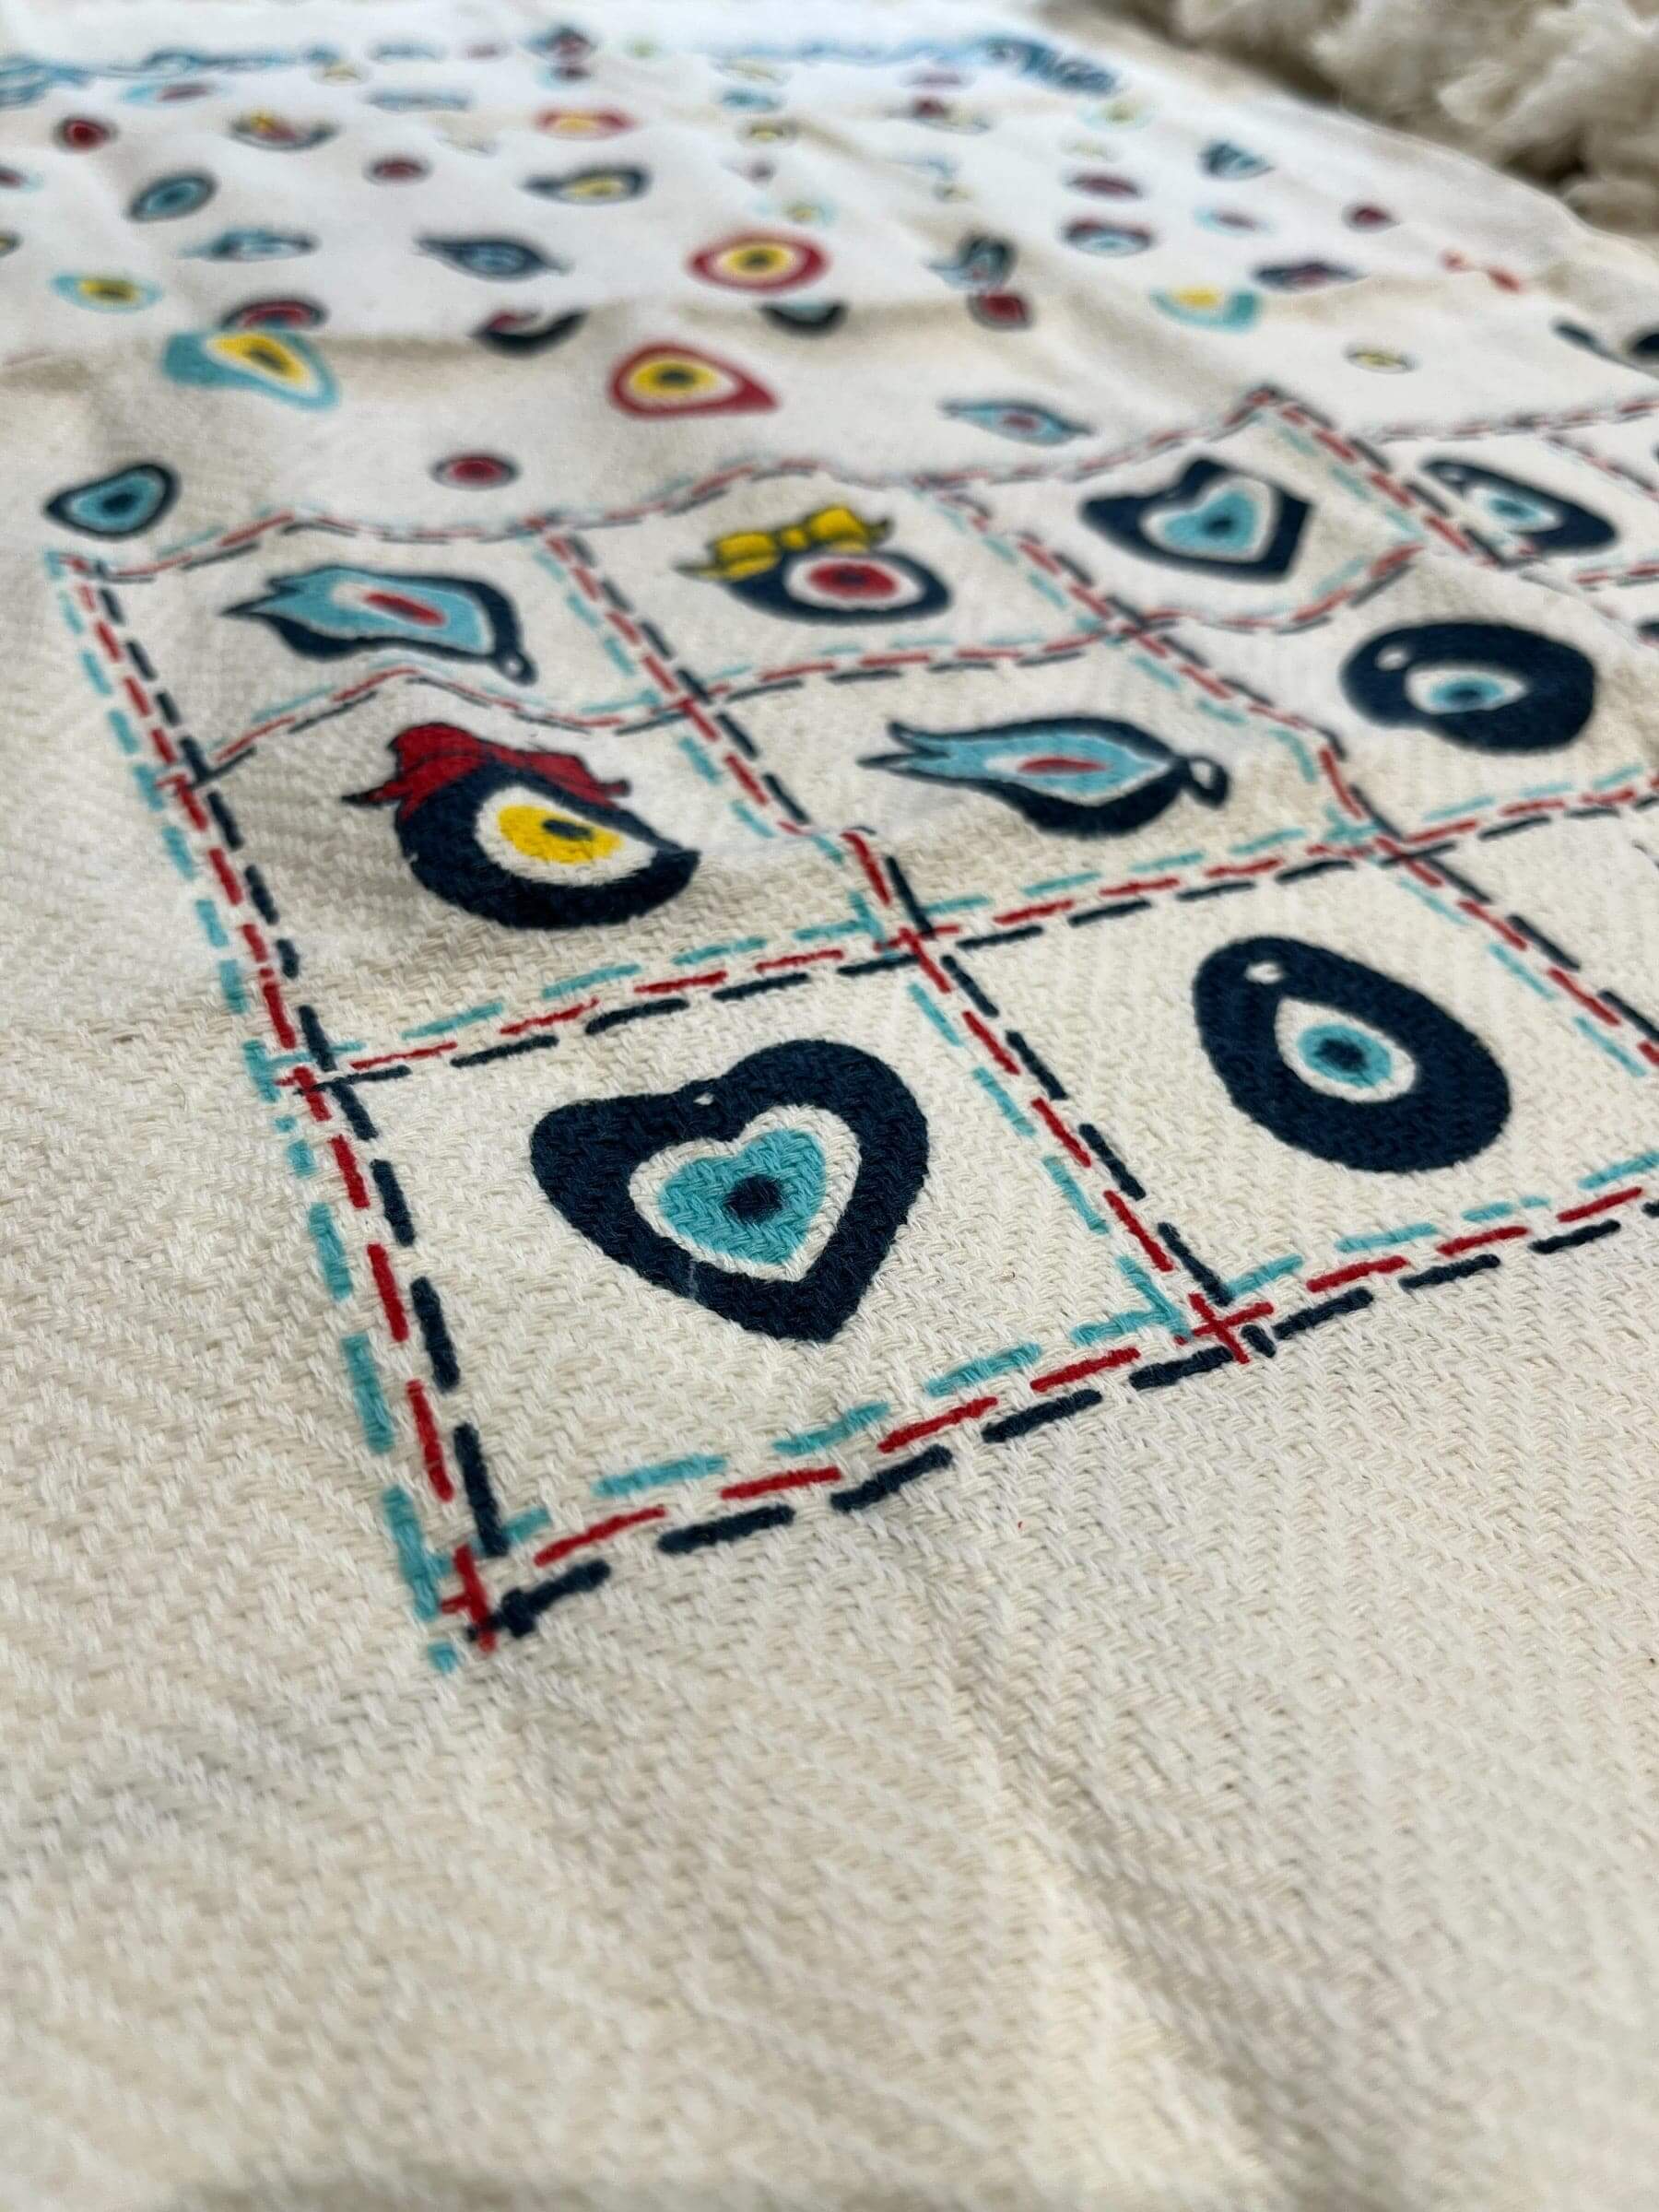 Tea Towels (Cotton Kitchen Towels) Evil Eye Heart100% Cotton Tea Towel, made in Turkey, These towels offer premium quality with their pure cotton composition, ensuring high absorbency for drying dishes and versatile use in various kitchen tasks. Their dur